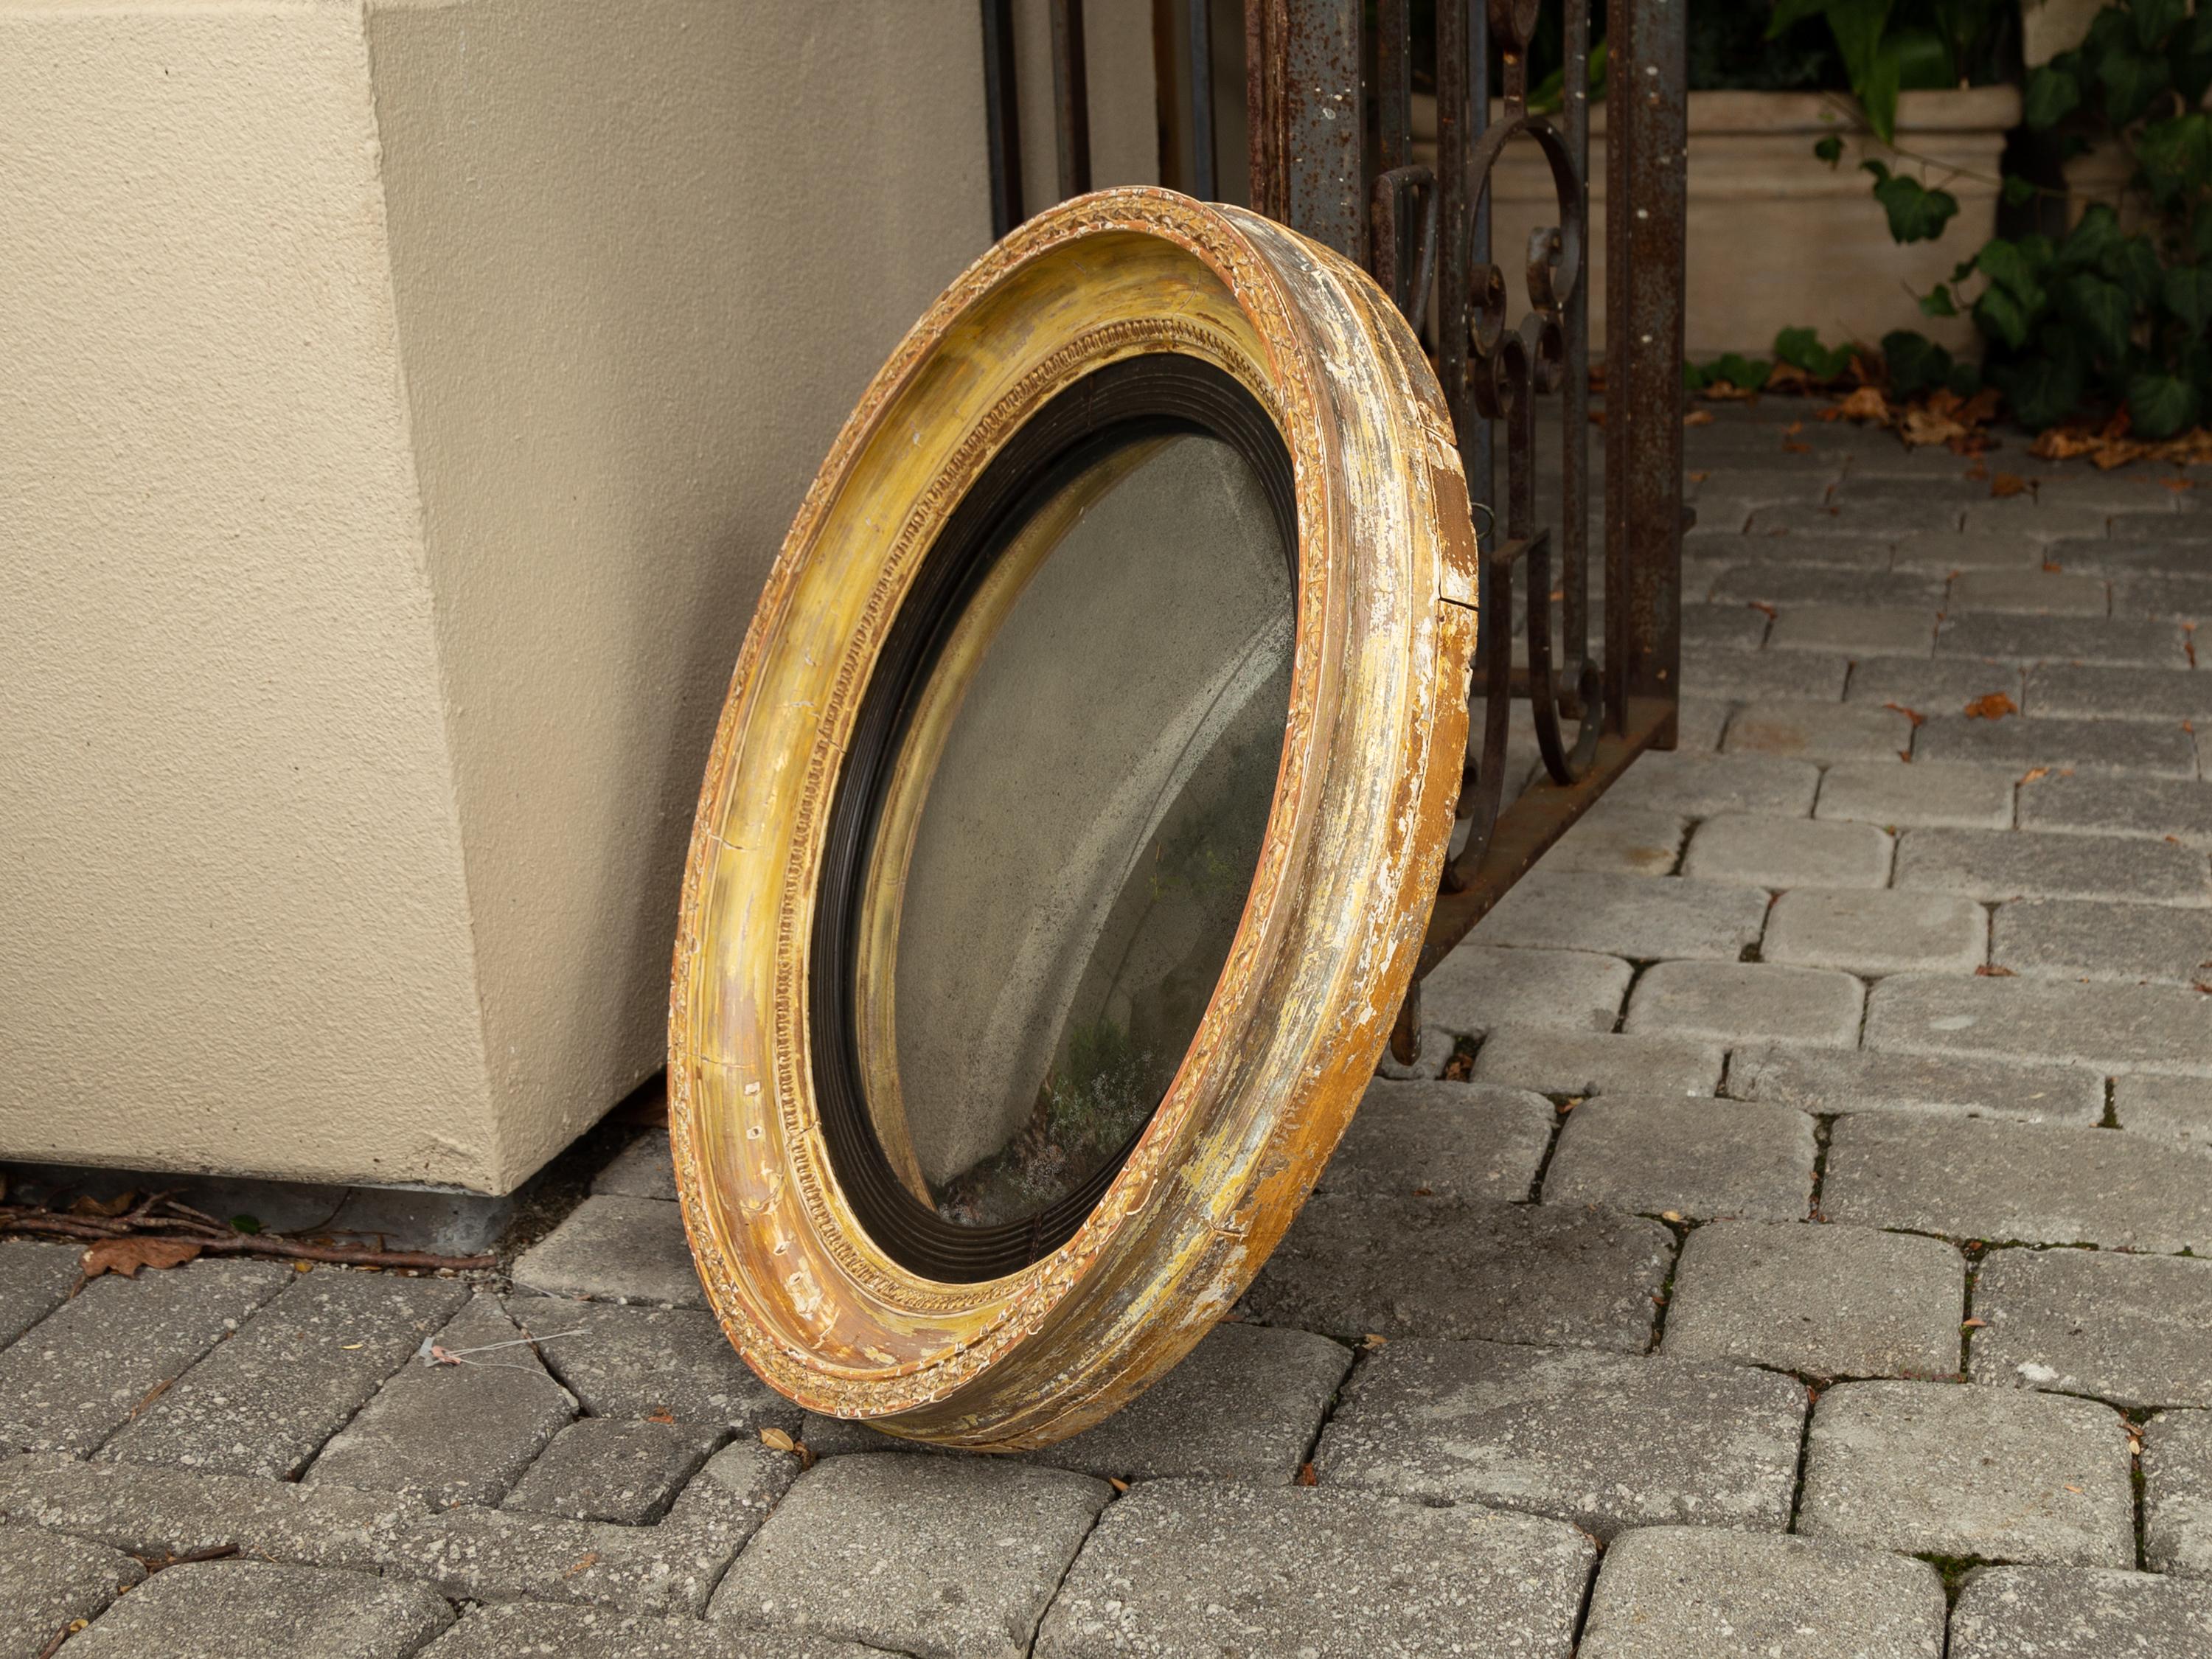 Painted English 1870s Distressed Wood Convex Bullseye Mirror with Ebonized Accents